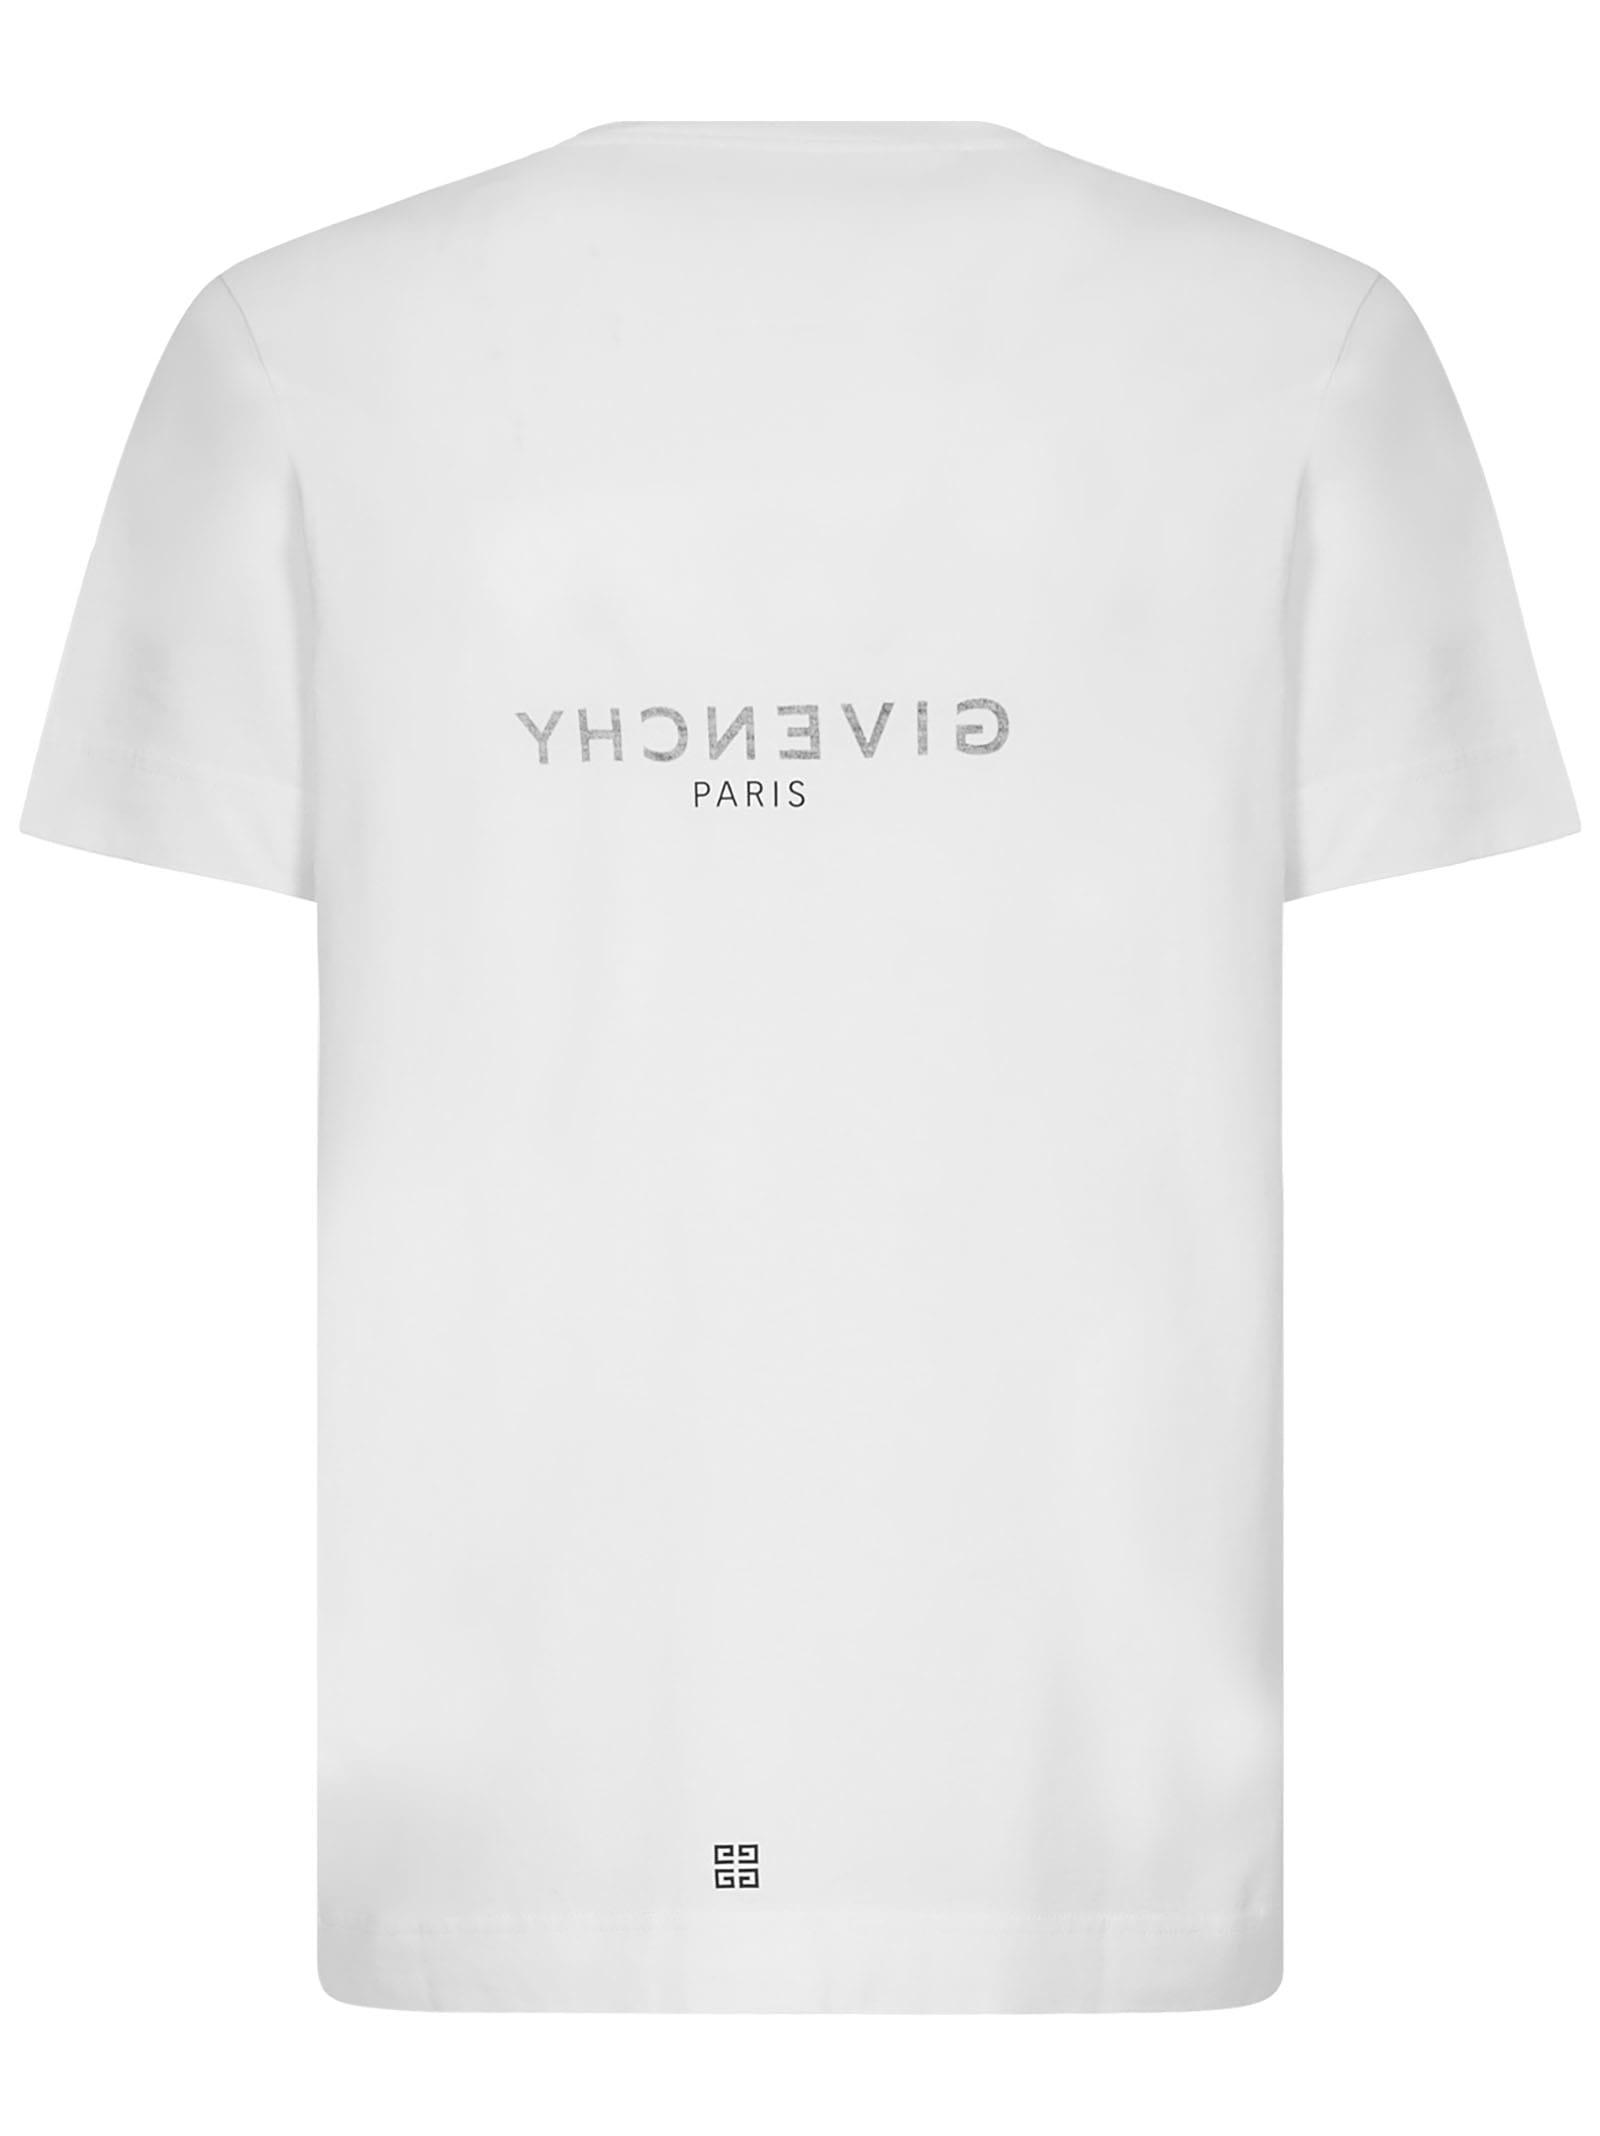 Givenchy T-shirt in White for Men | Lyst